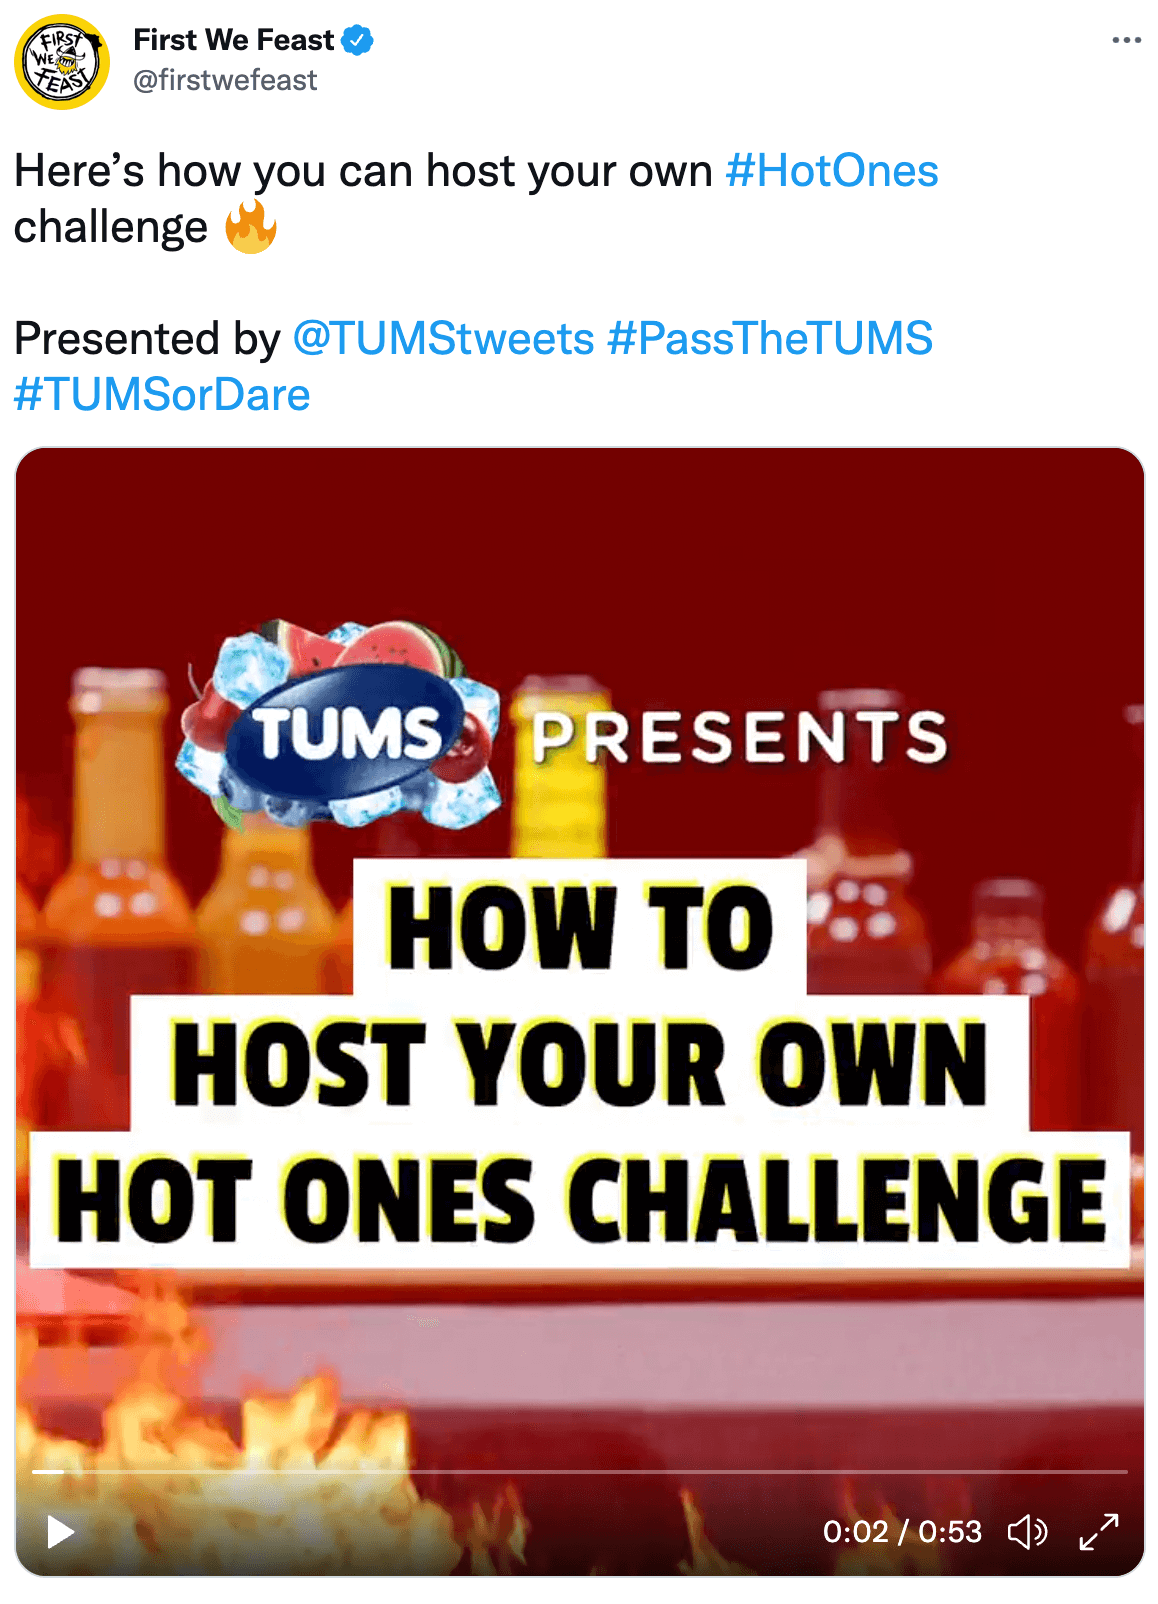 Example of a sponsored social media post by TUMS